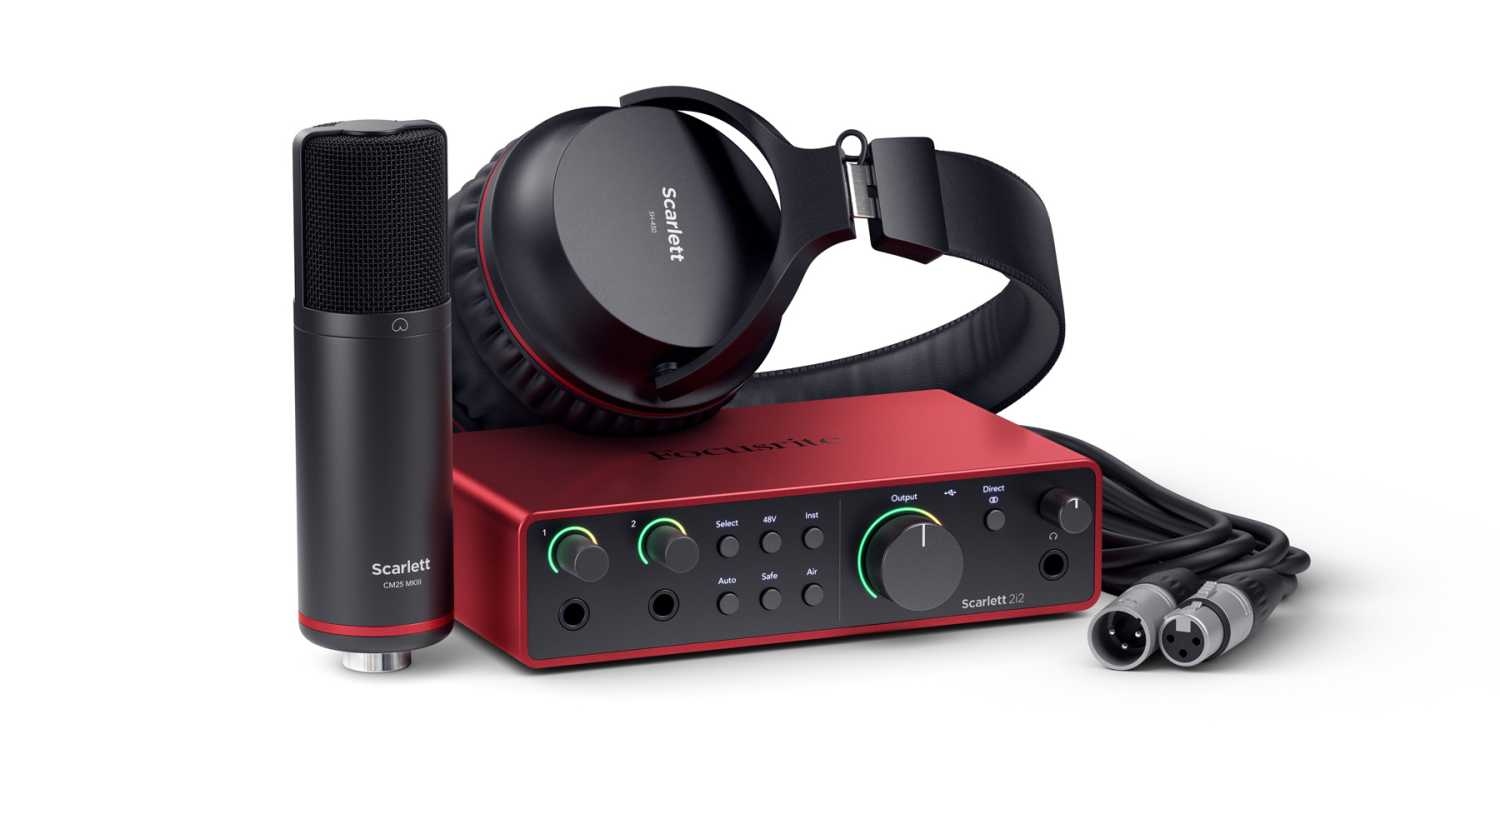 The newly launched Scarlett 4th Gen range of audio interfaces will be available for hands-on exploration